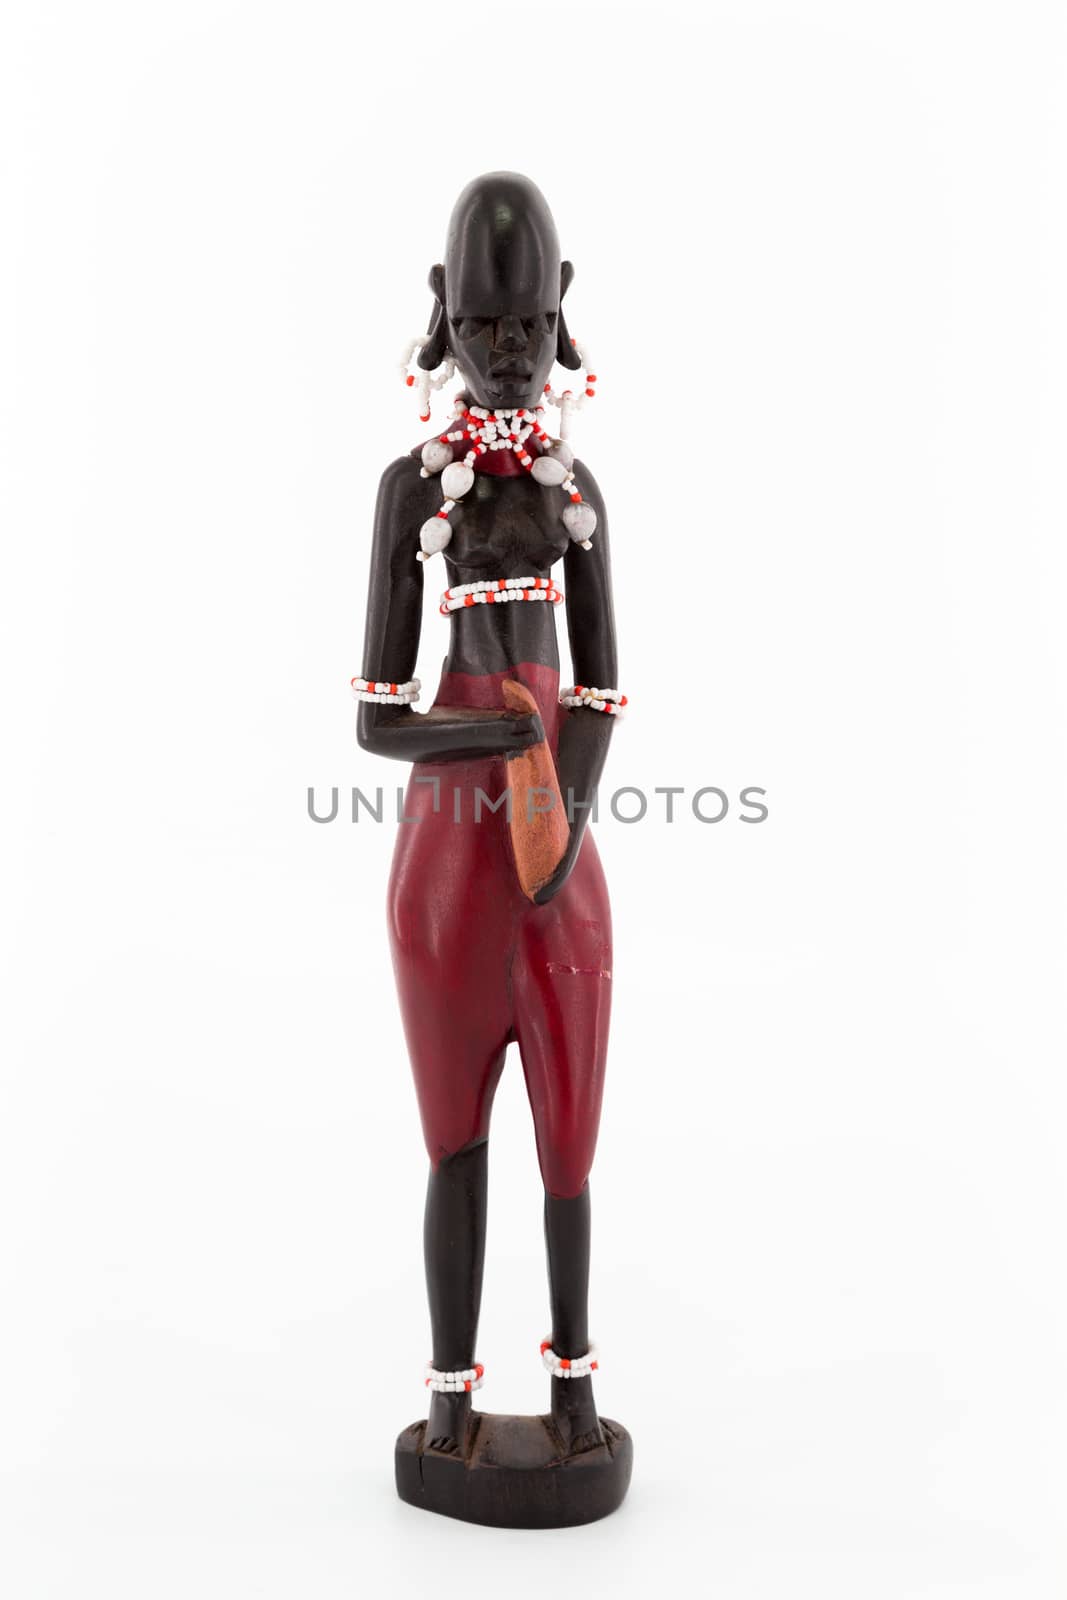 Wooden figure of a Maasai woman on white background by 25ehaag6